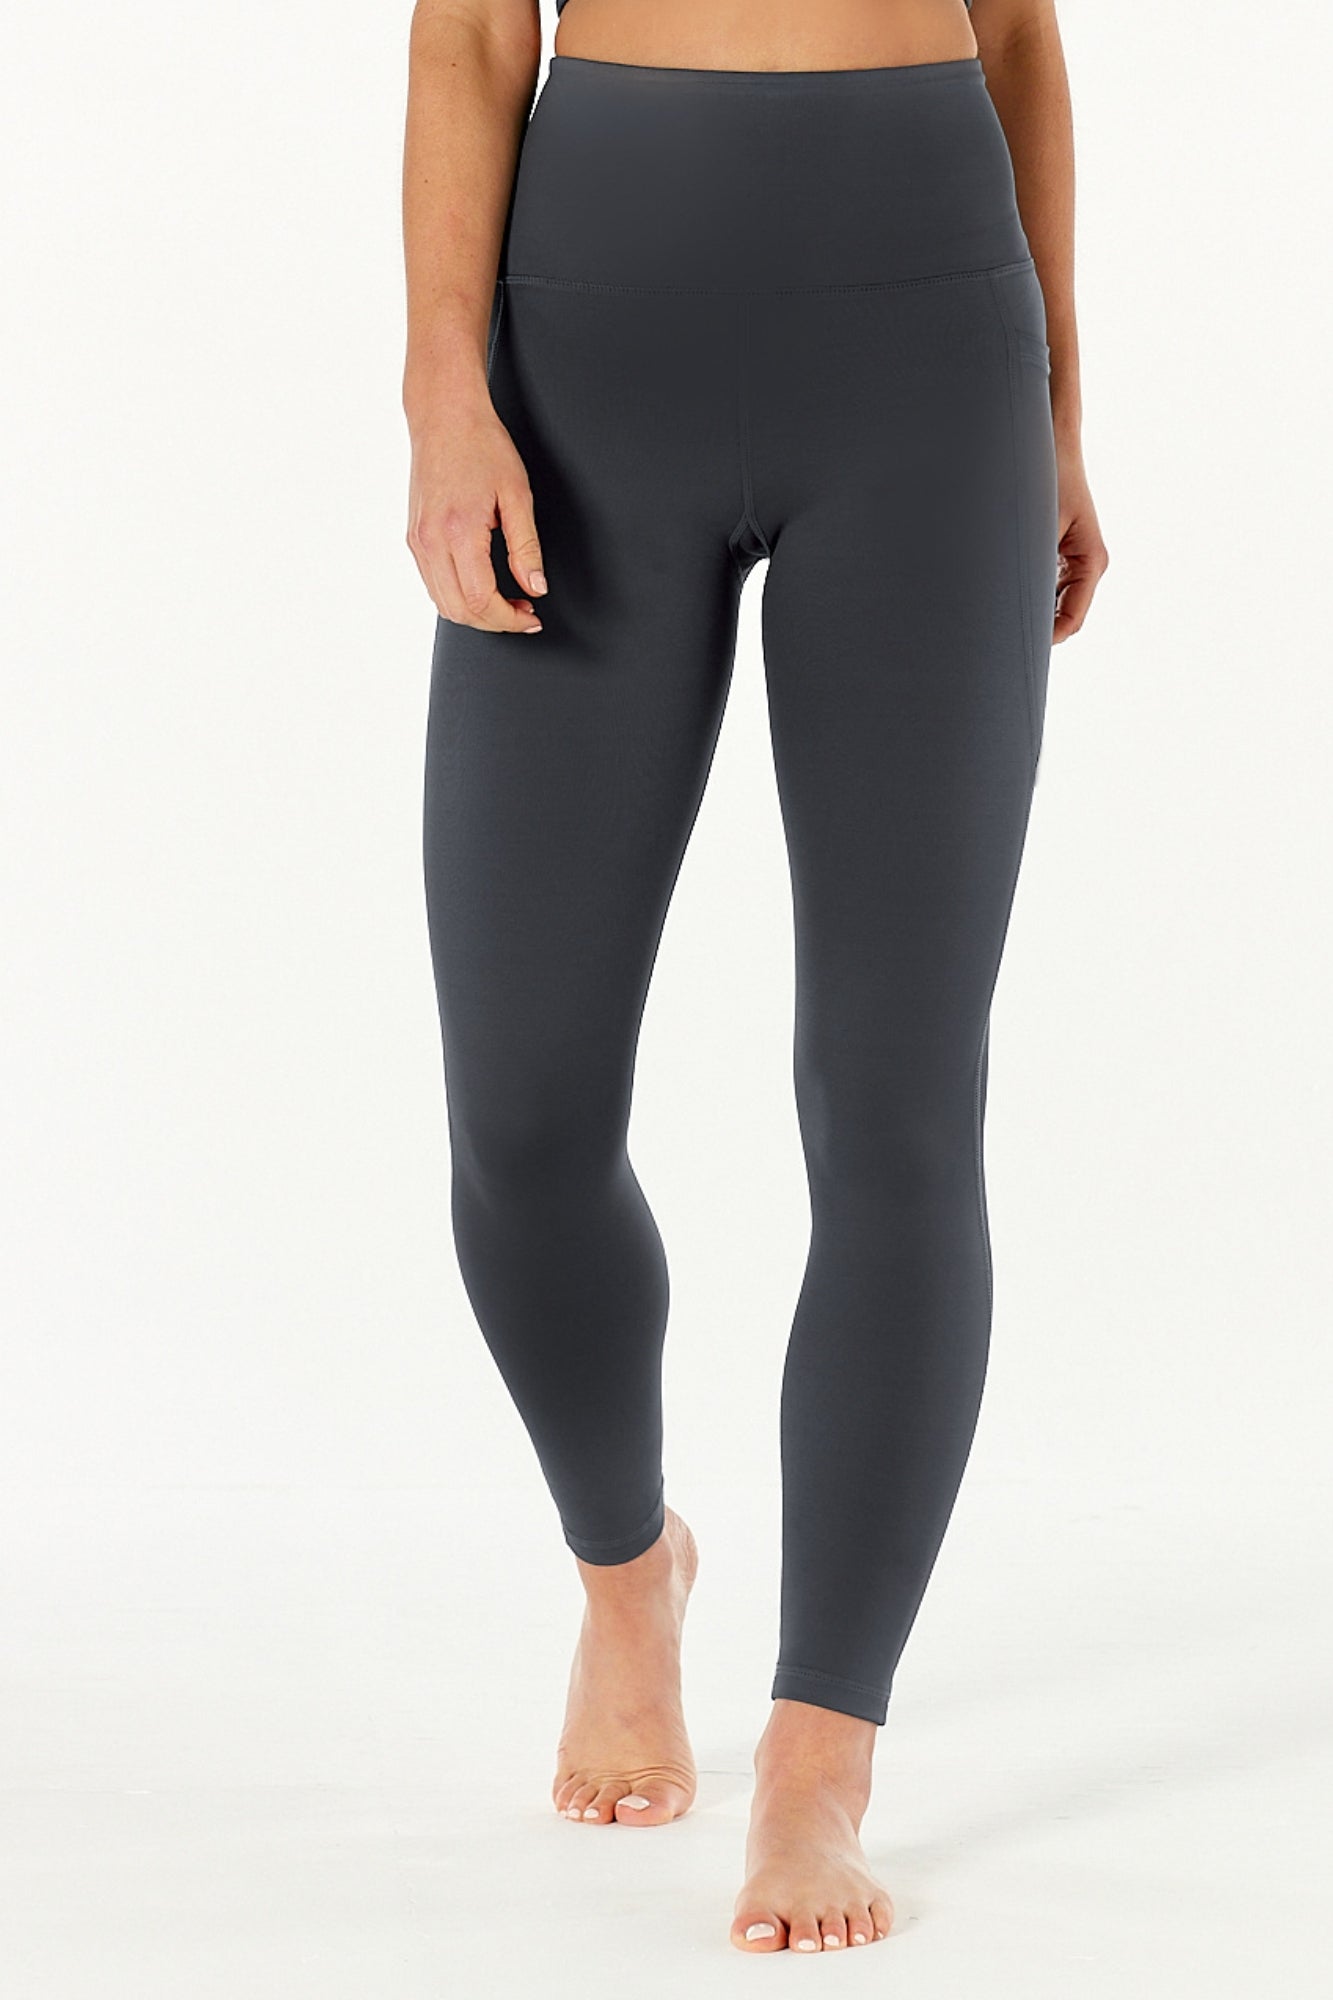 SEVEN EIGHT Leggings / Grey Marl – A-Fitsters